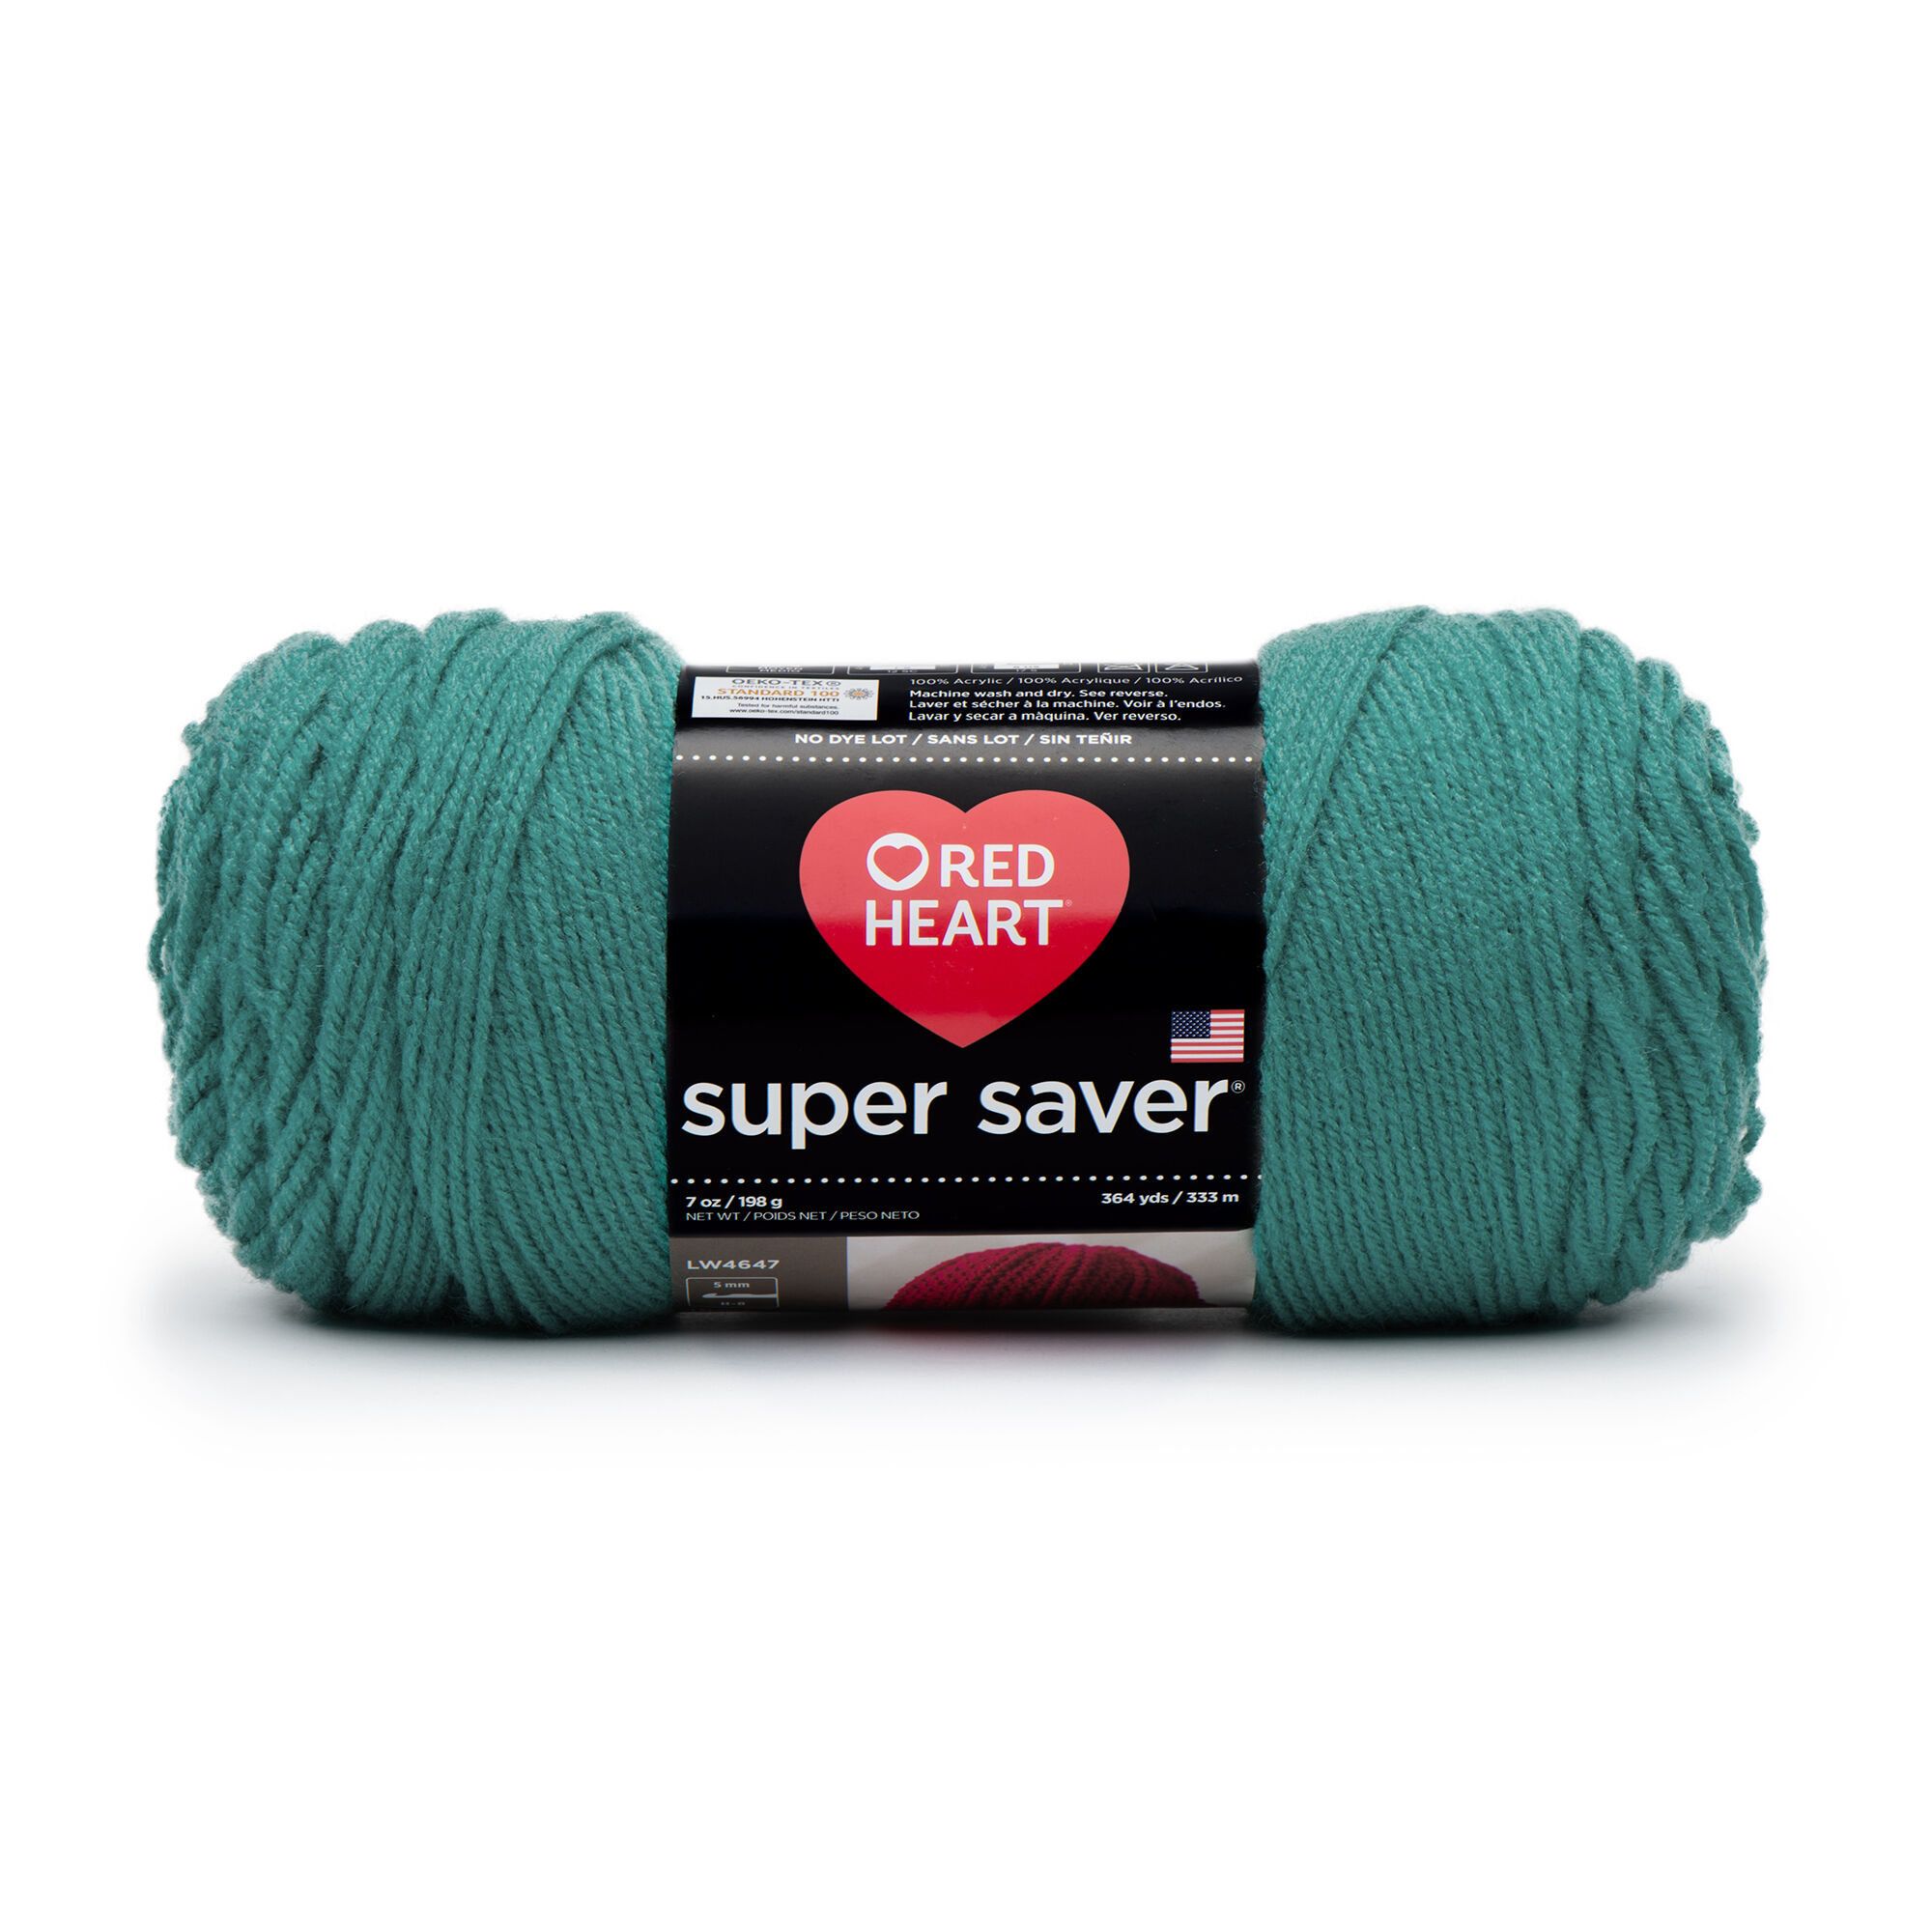 RED HEART SUPER SAVER ECON JADE - image 1 of 15